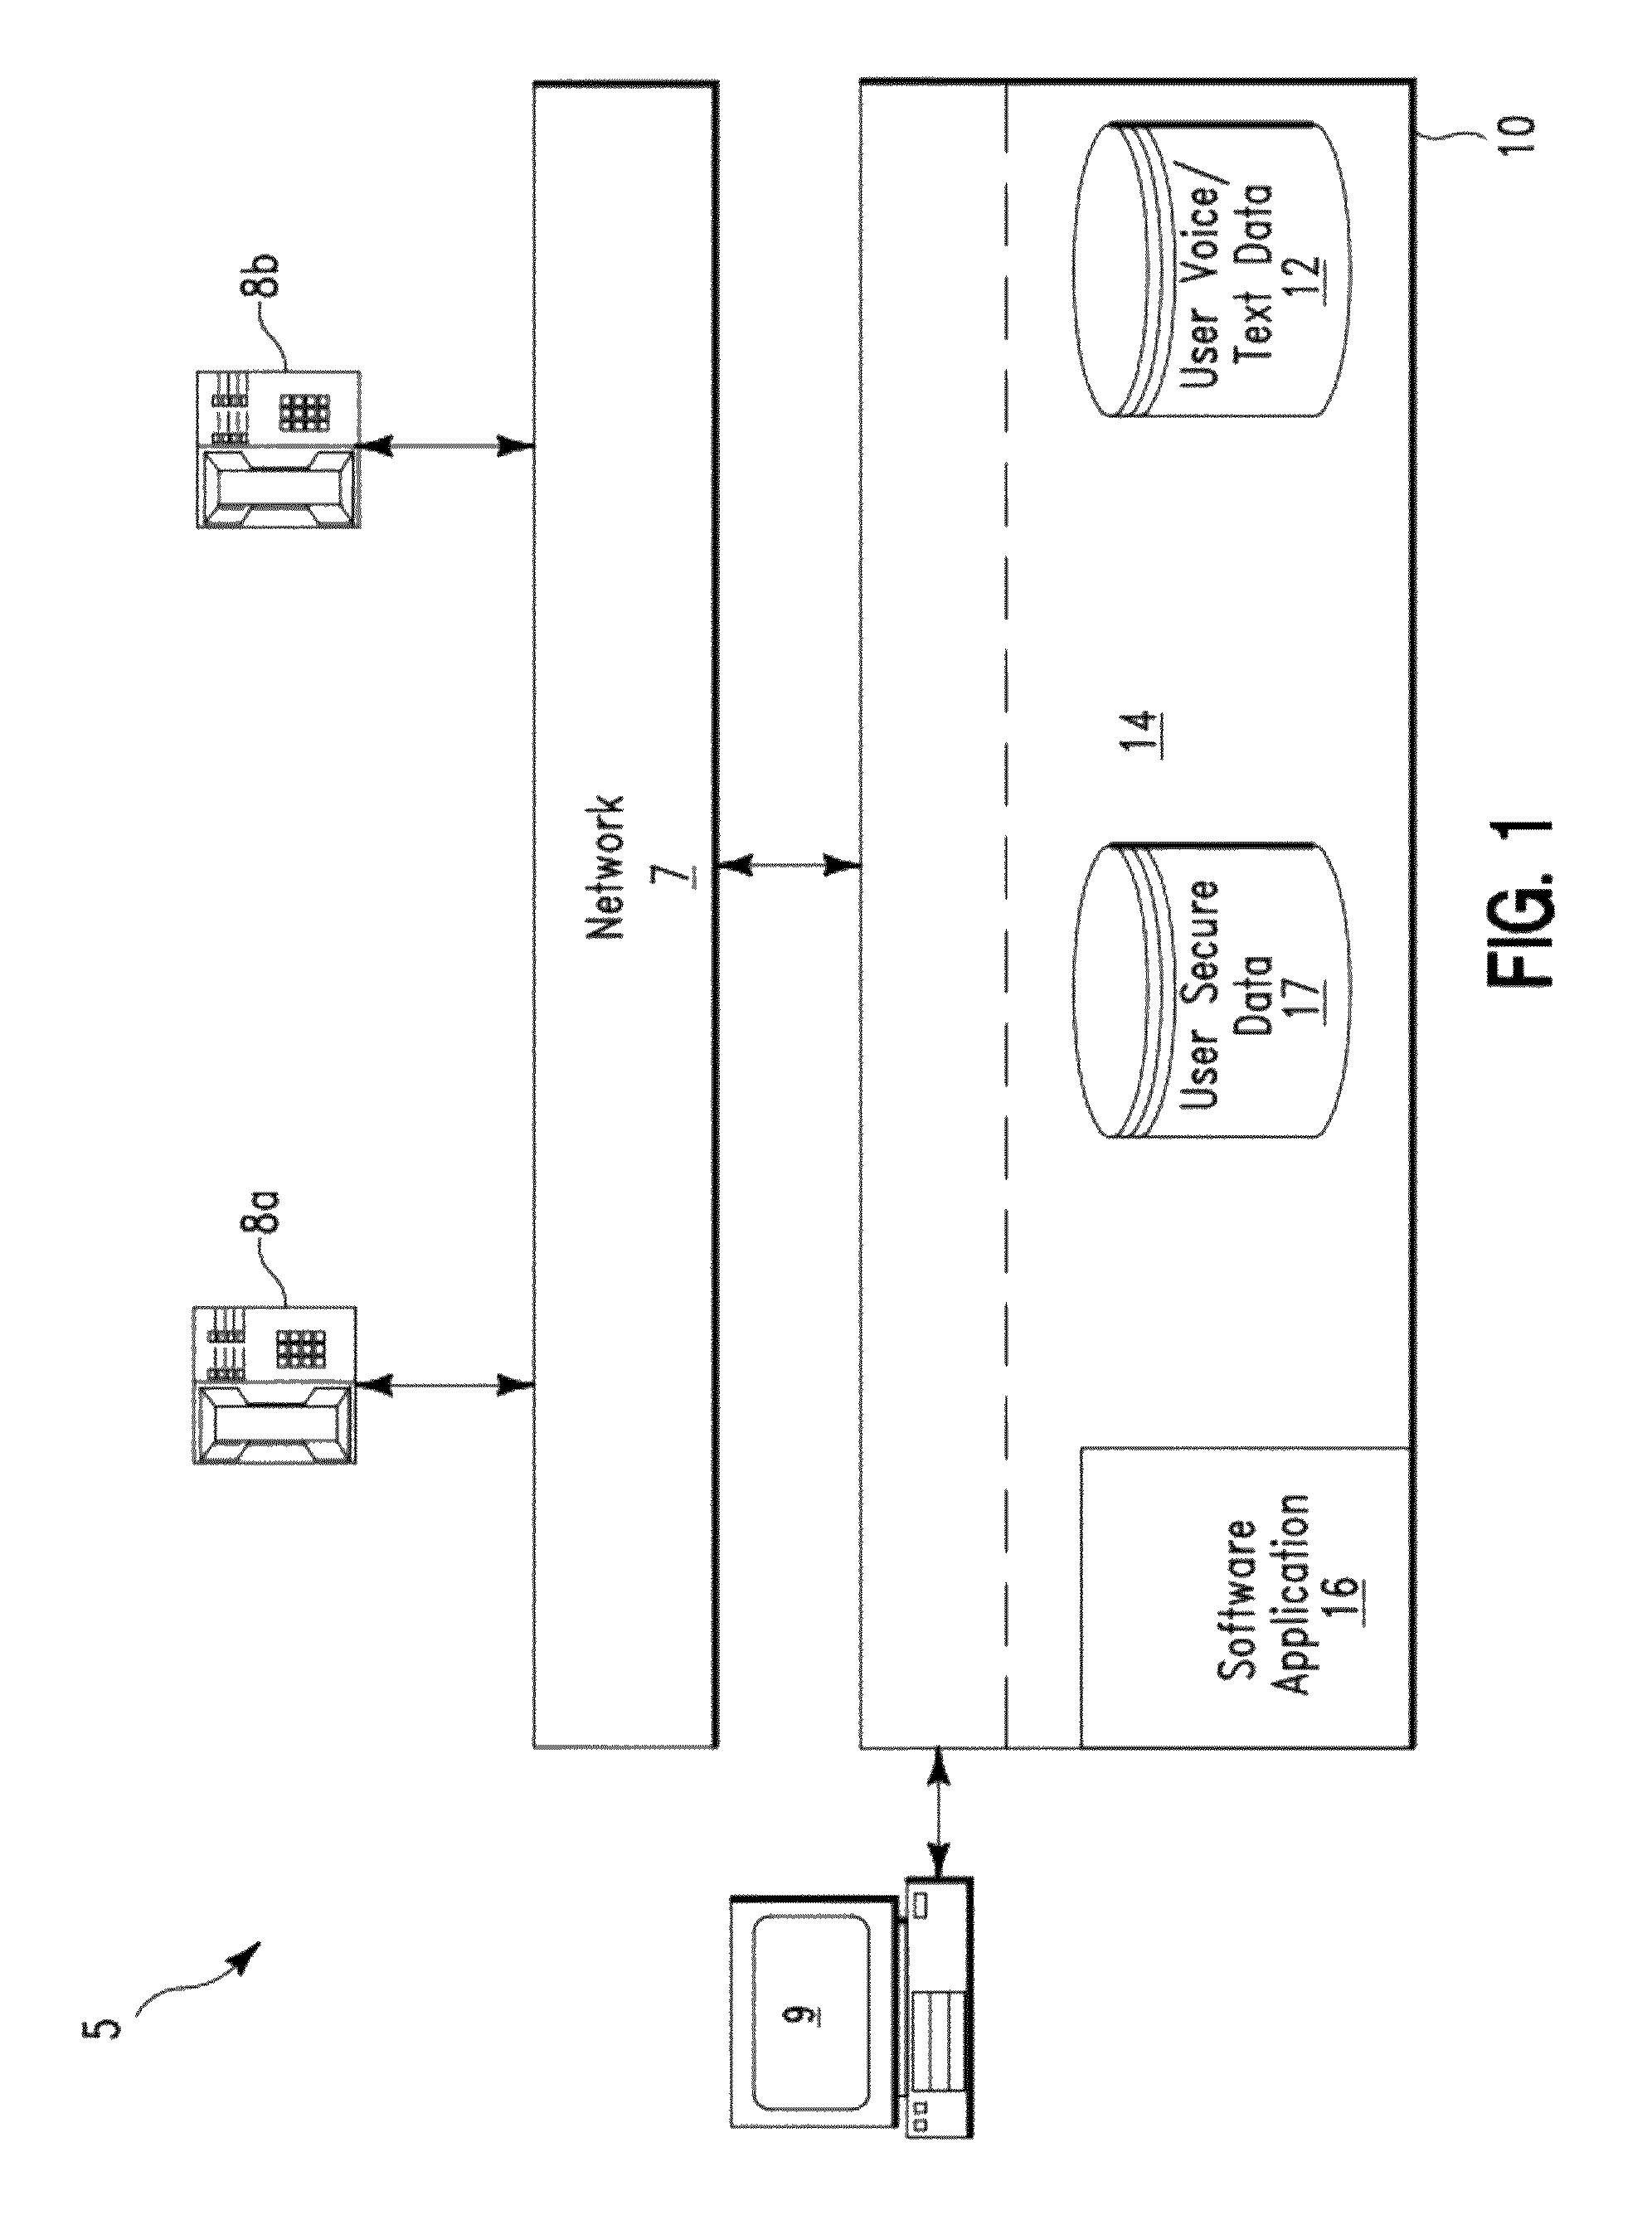 Secure voice transaction method and system